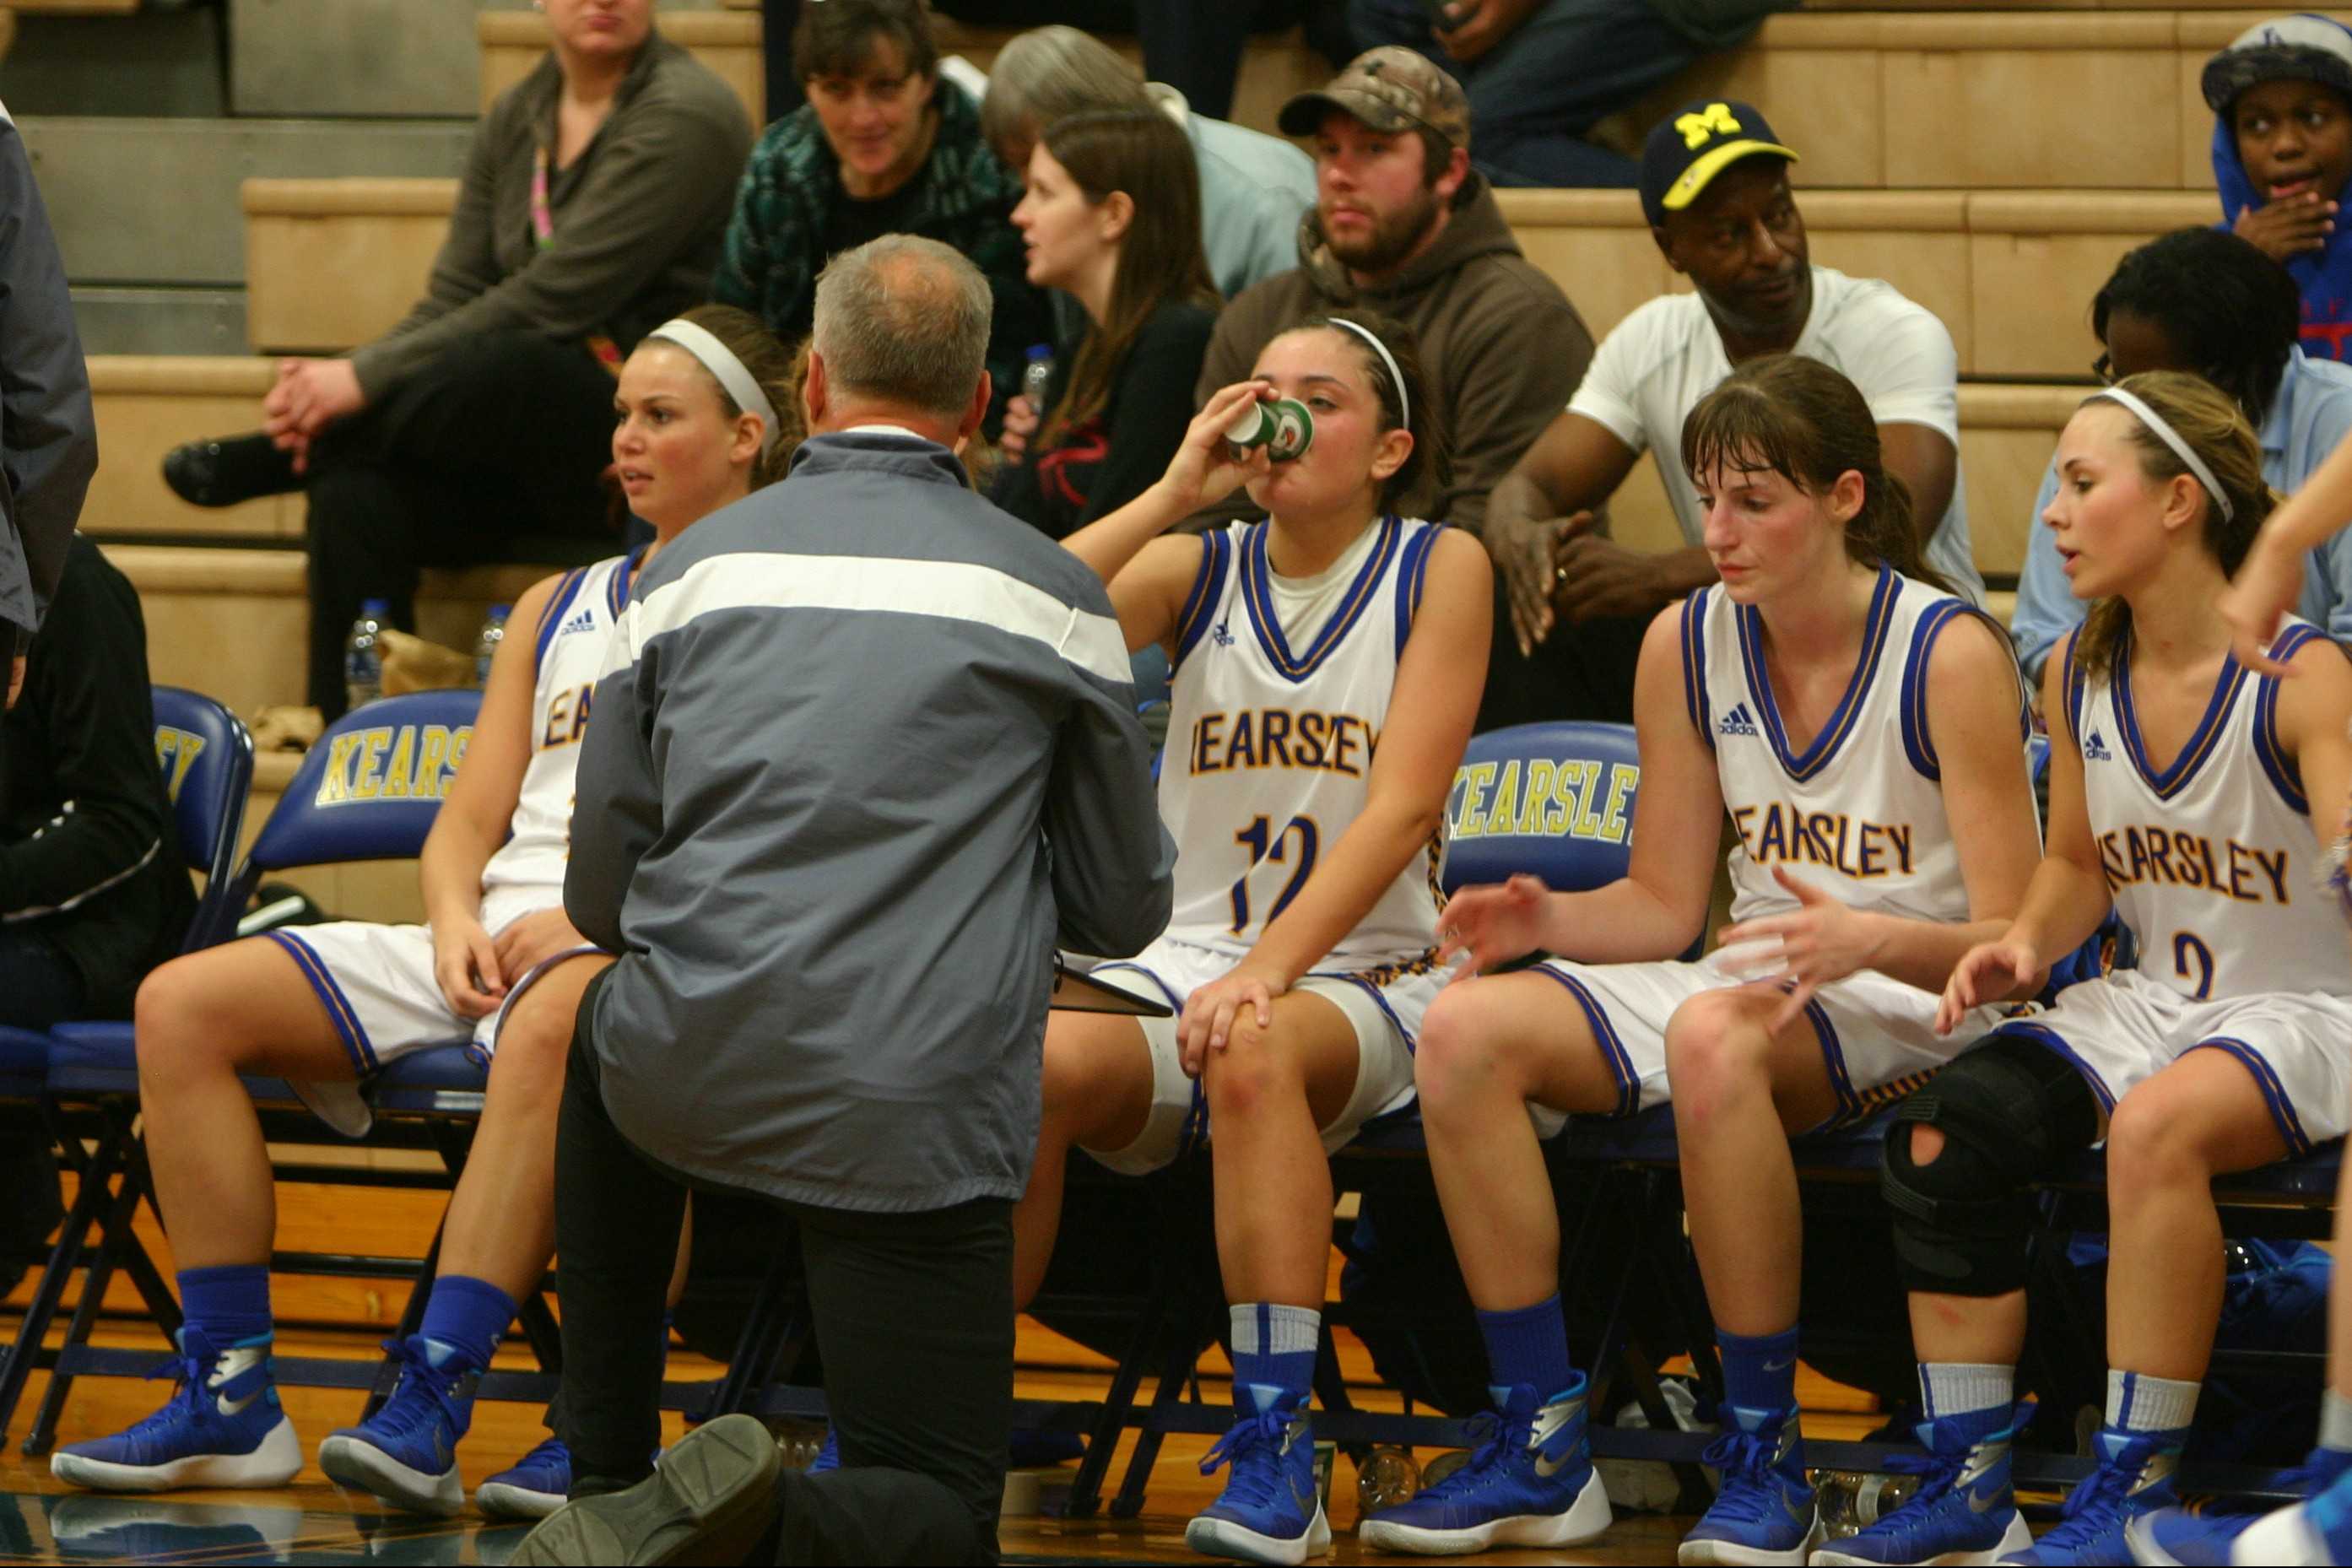 The girls' basketball team listens to directions from Coach Matt Gildner during a timeout. The Hornets lost the game to Swartz Creek on Friday, Dec. 11.